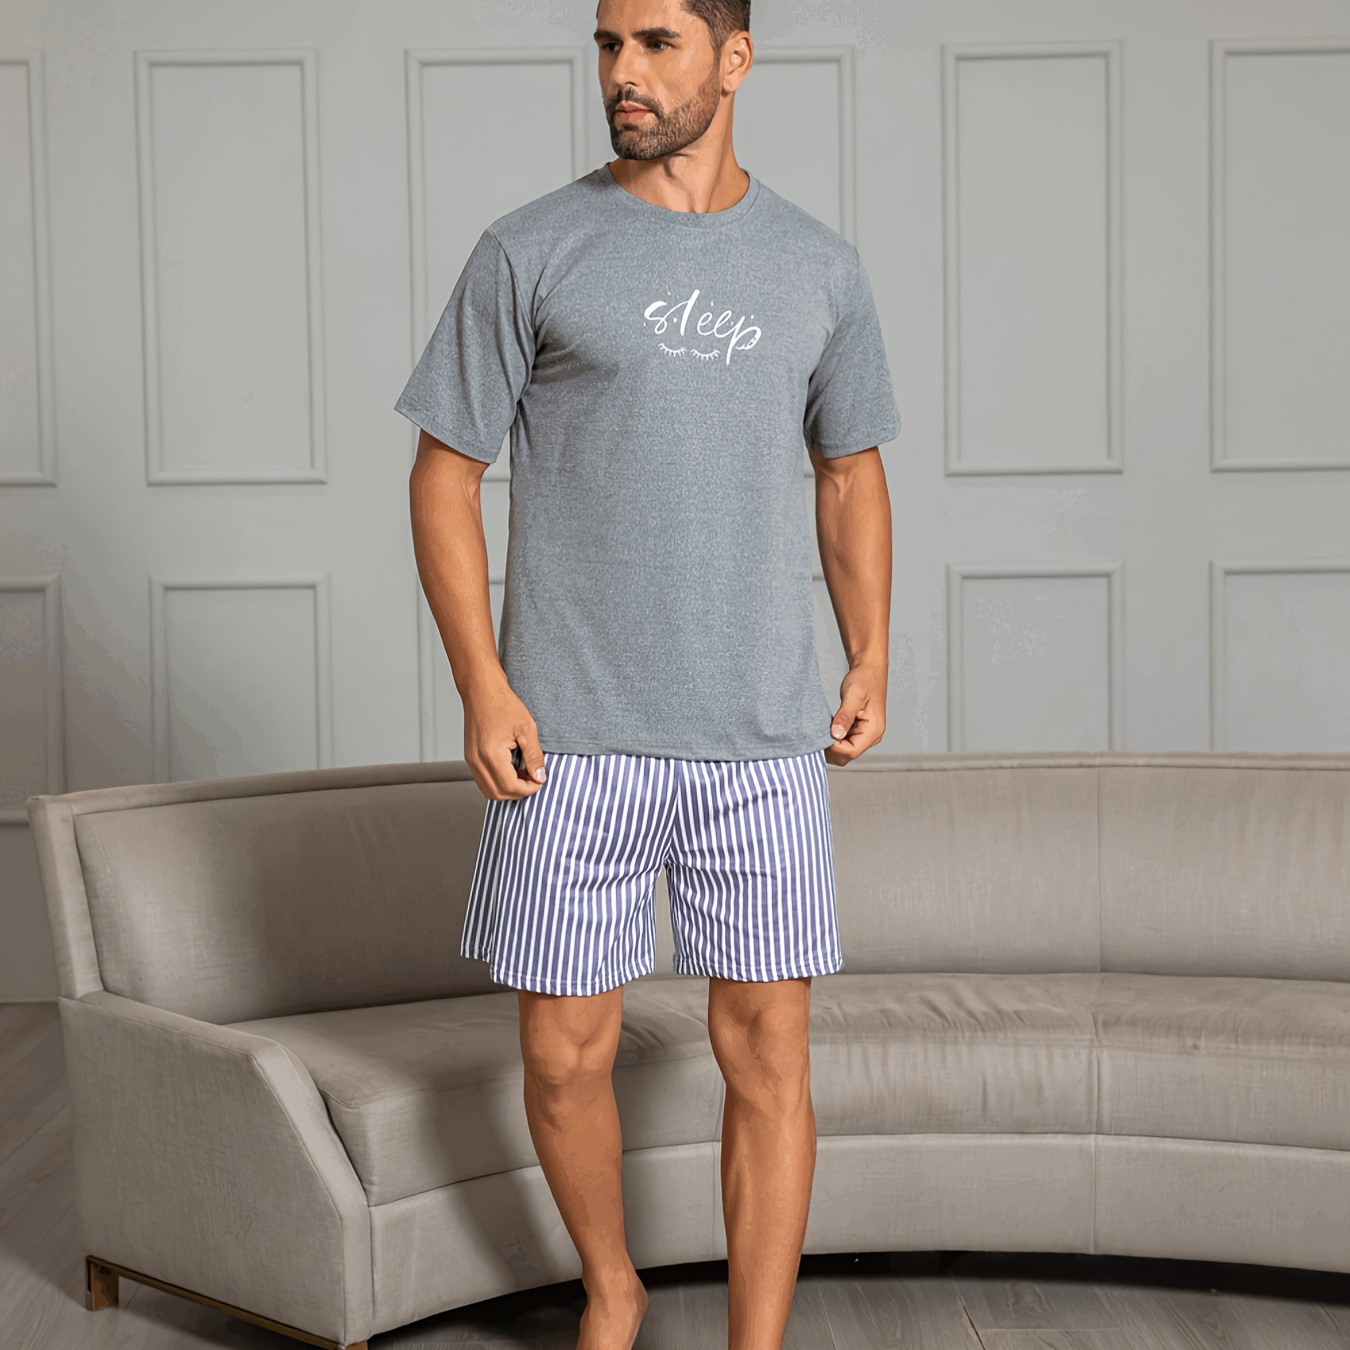 

Men's Summer Sleepwear Set, Soft Comfortable Short Sleeve With Letter Print & Striped Shorts, Suitable For Home And Outdoor Wearing